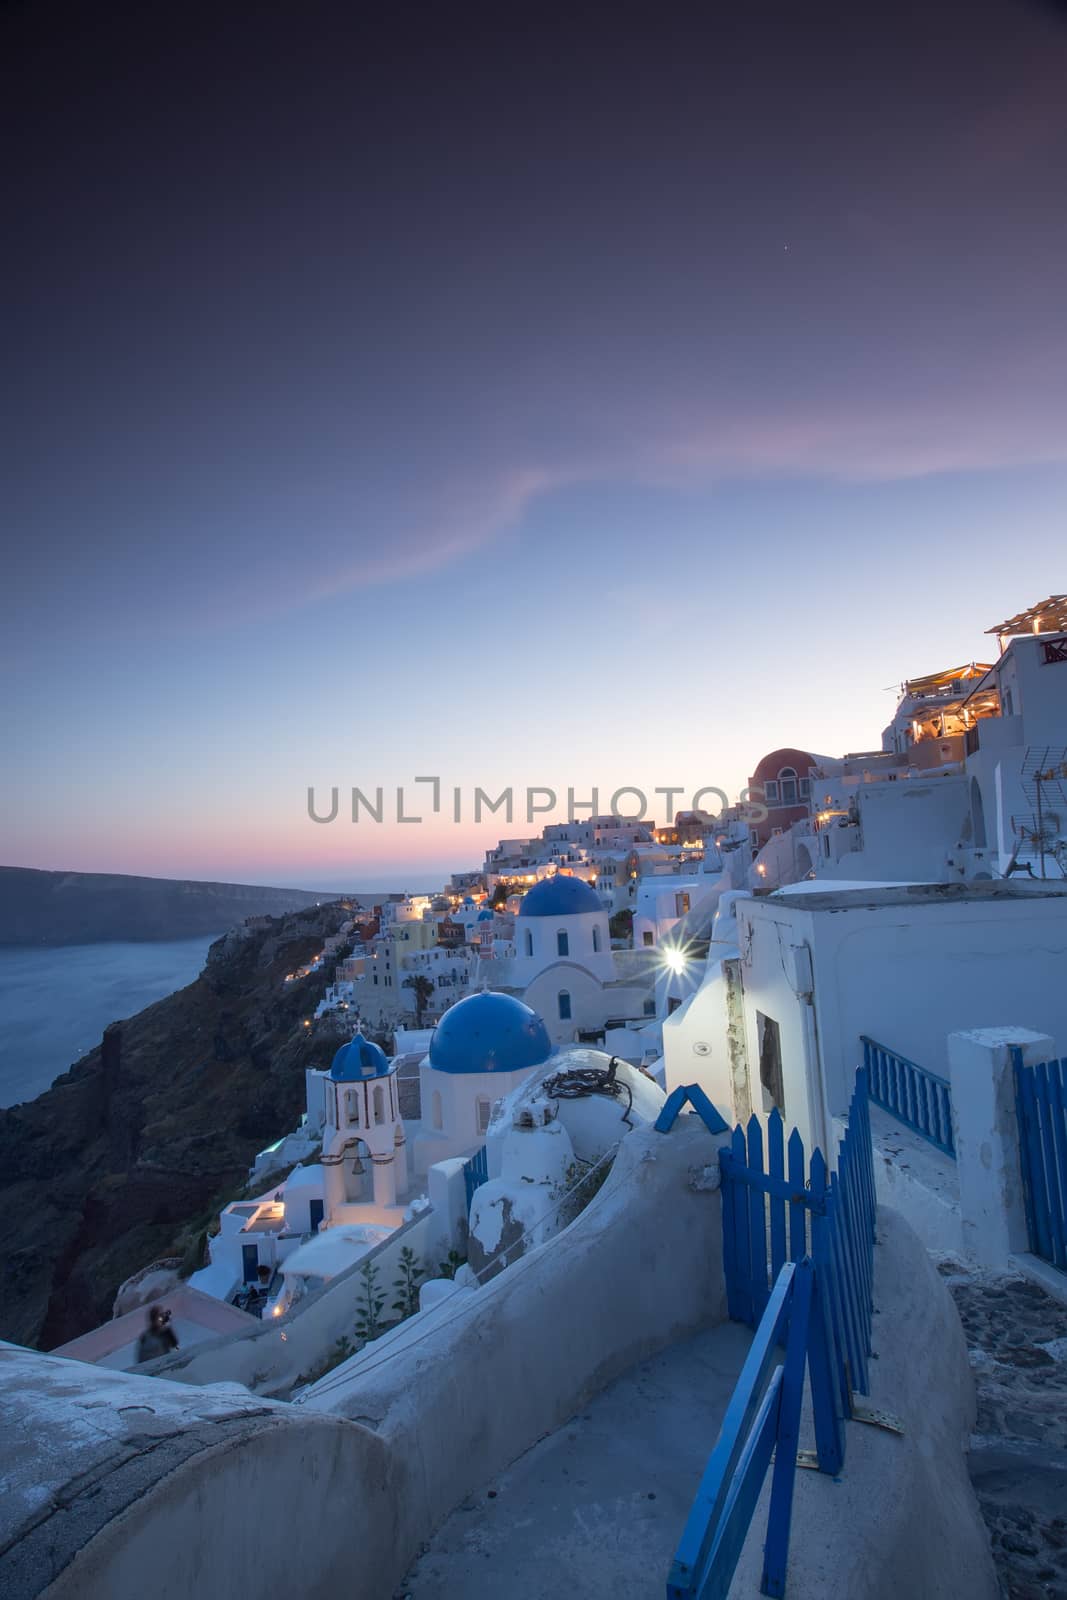 The sunset at Oia village in Santorini island in Greece by ververidis